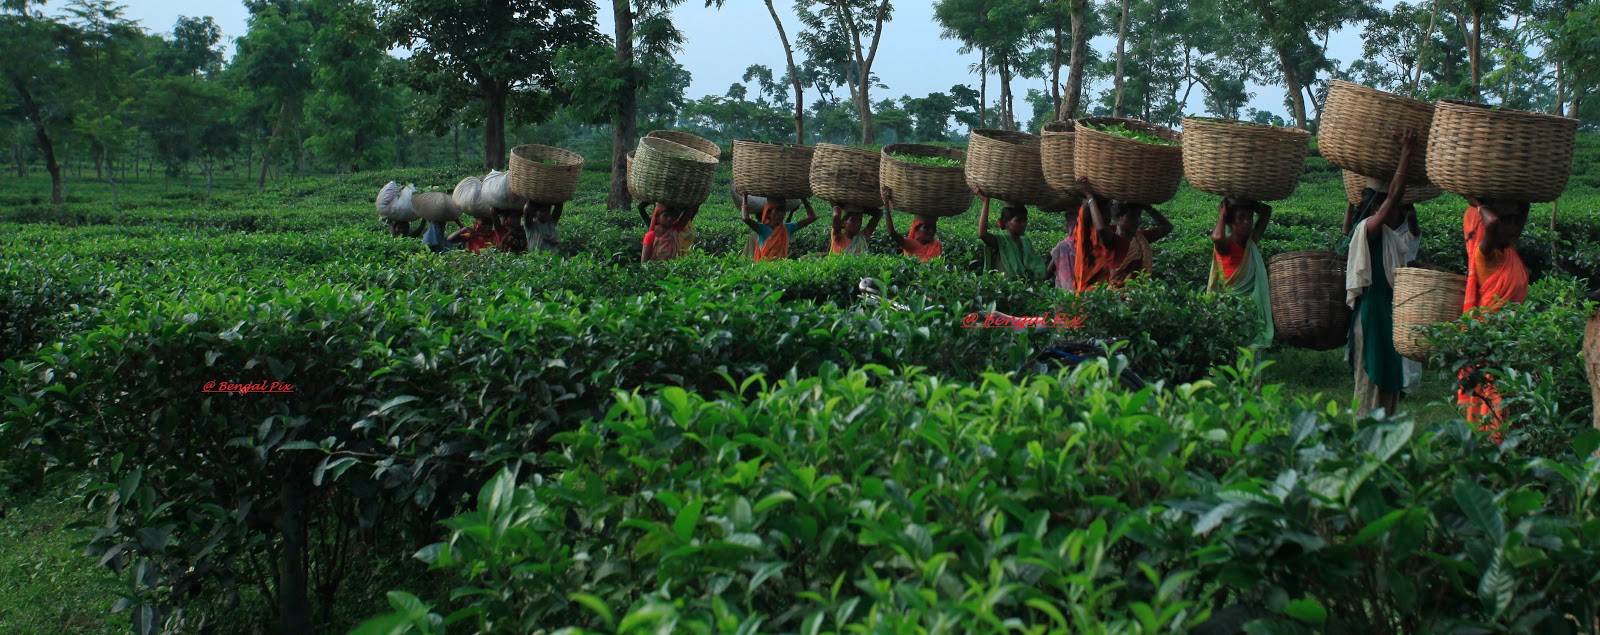 Sreemangal, The Tea Capital of Bangladesh, is a picturesque hilly area covered with tea estates, lemon groves and pineapple gardens | Steemit